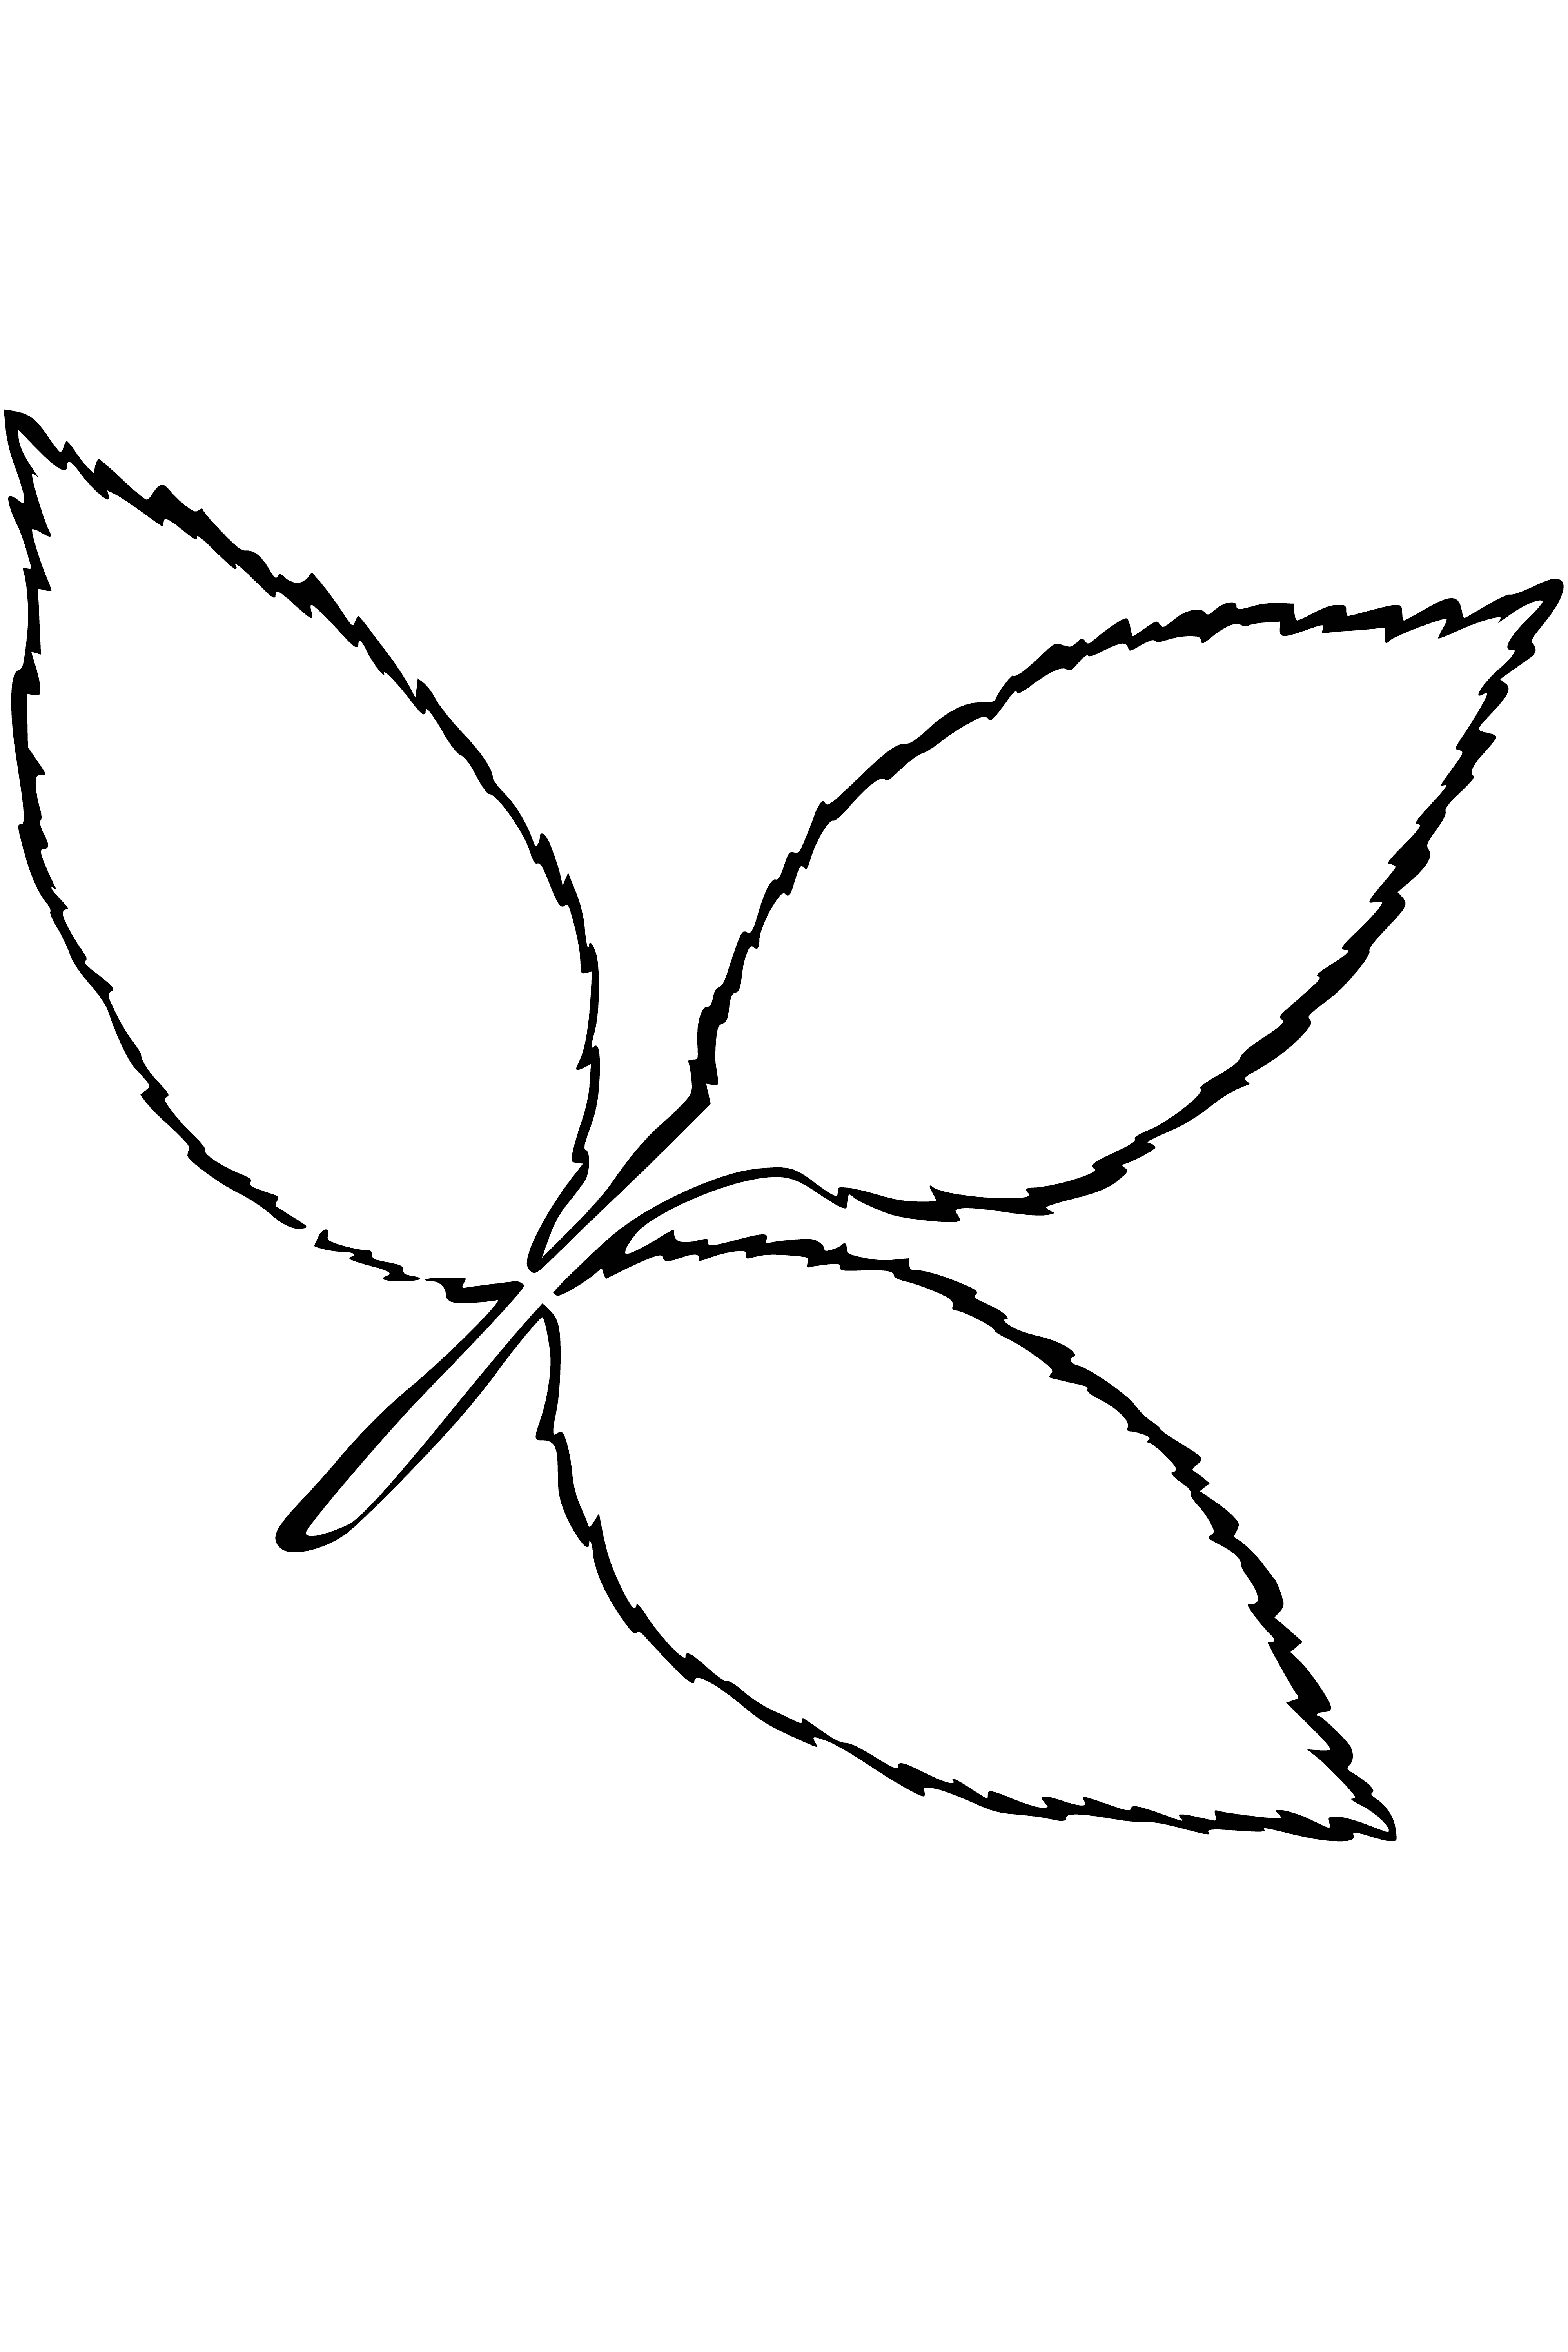 coloring page: I see a green ash leaf with white veins, serrated edges and a small, black, oval-shaped fruit with three bumps.